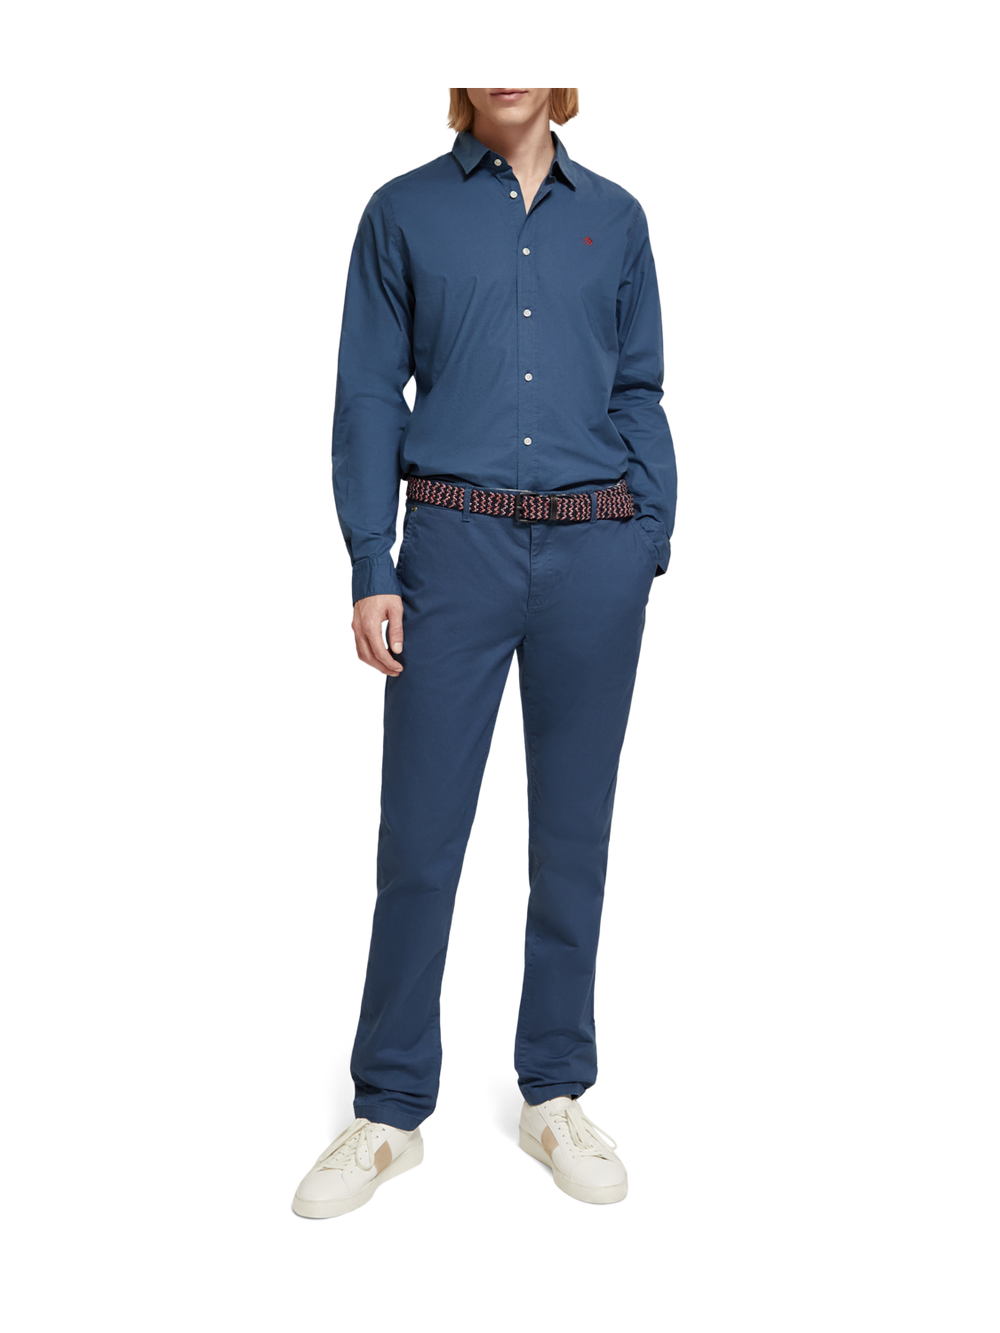 Stuart Regular Slim Fit Chino in Storm Blue | Buster McGee